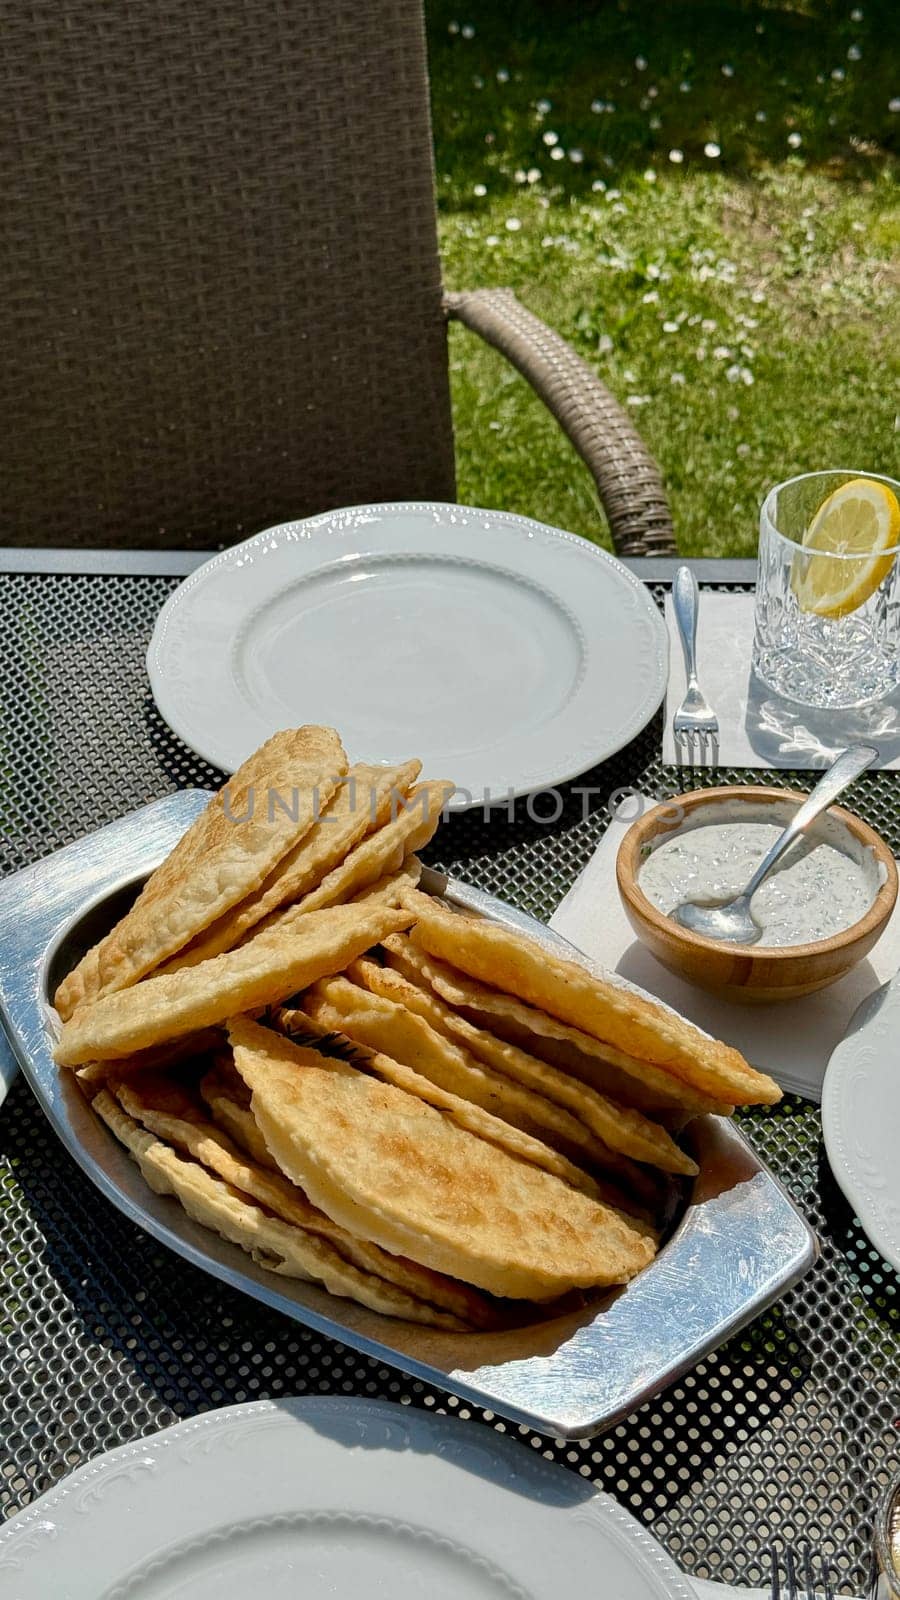 At the picnic, delicious hot chebureks with meat are prepared for tasting by MilaLazo